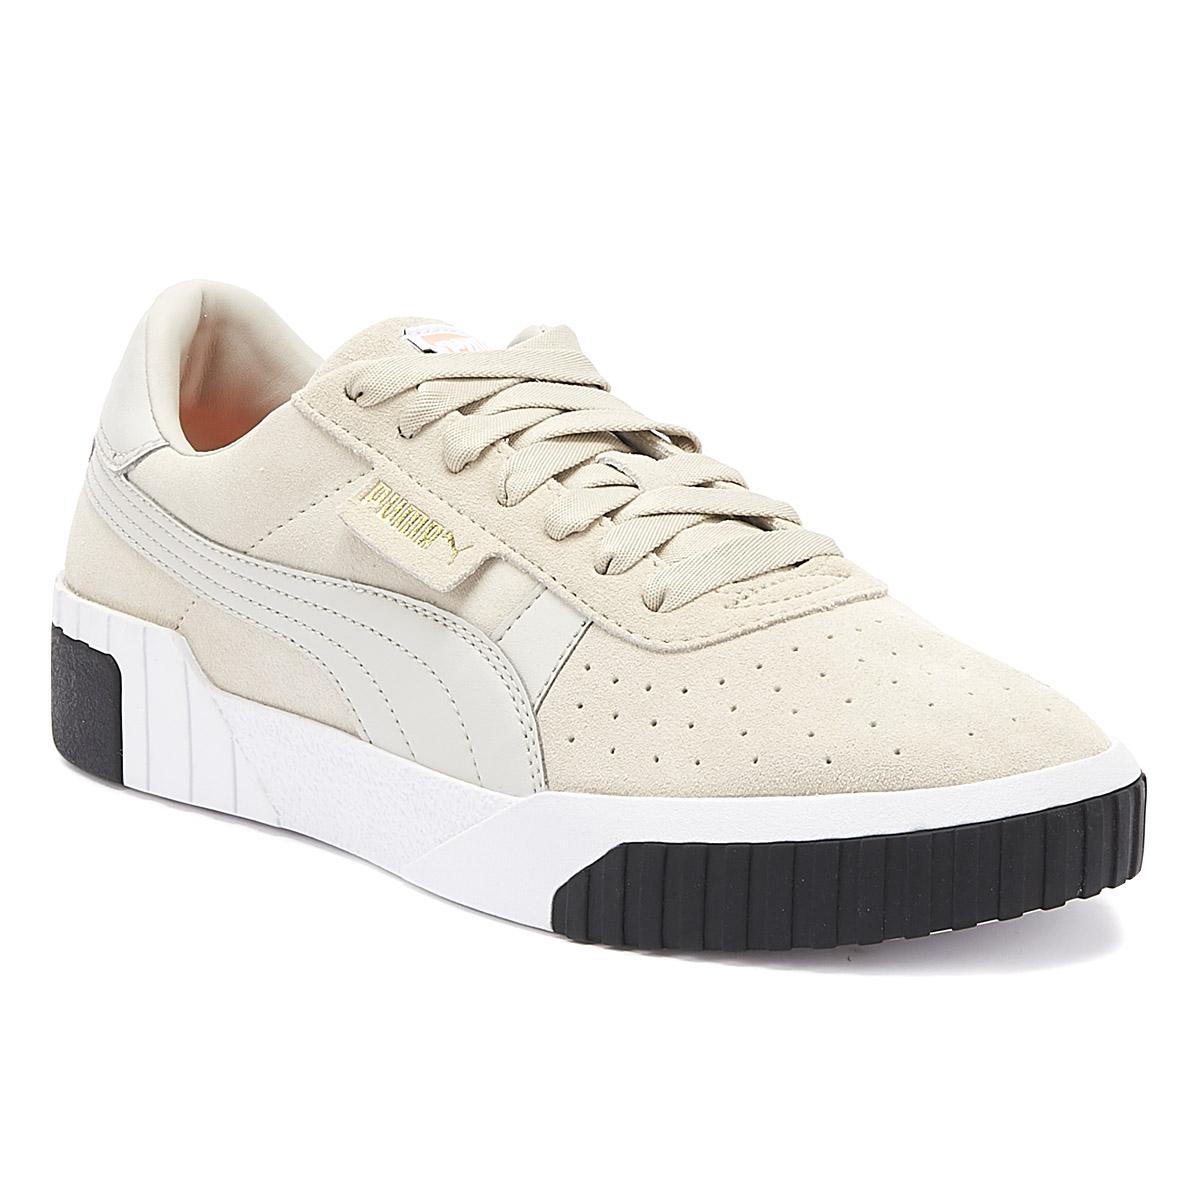 PUMA Cali Womens Silver Grey Suede Trainers in Gray - Lyst